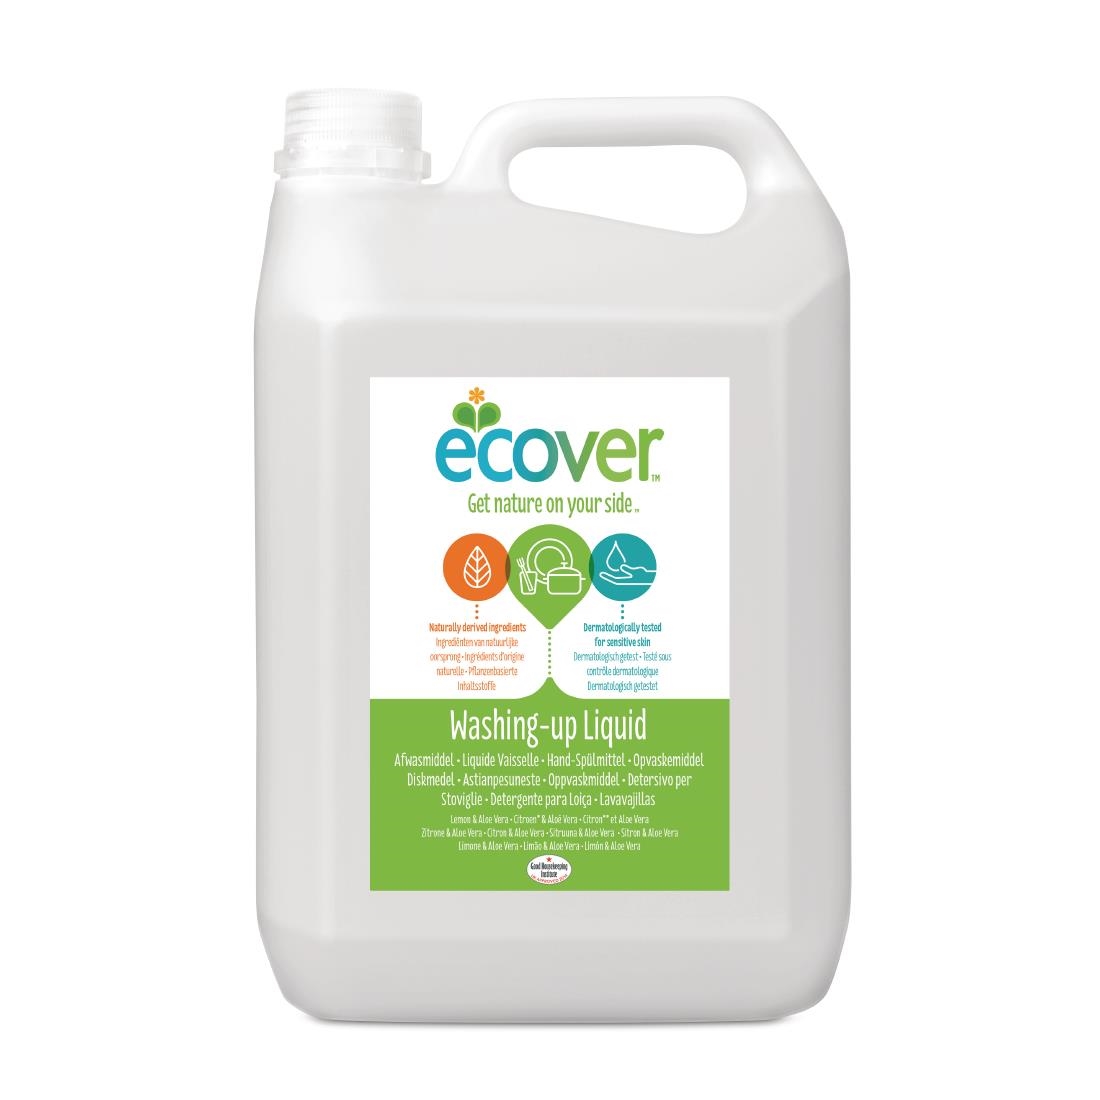 Ecover Lemon and Aloe Vera Washing Up Liquid Concentrate 5Ltr